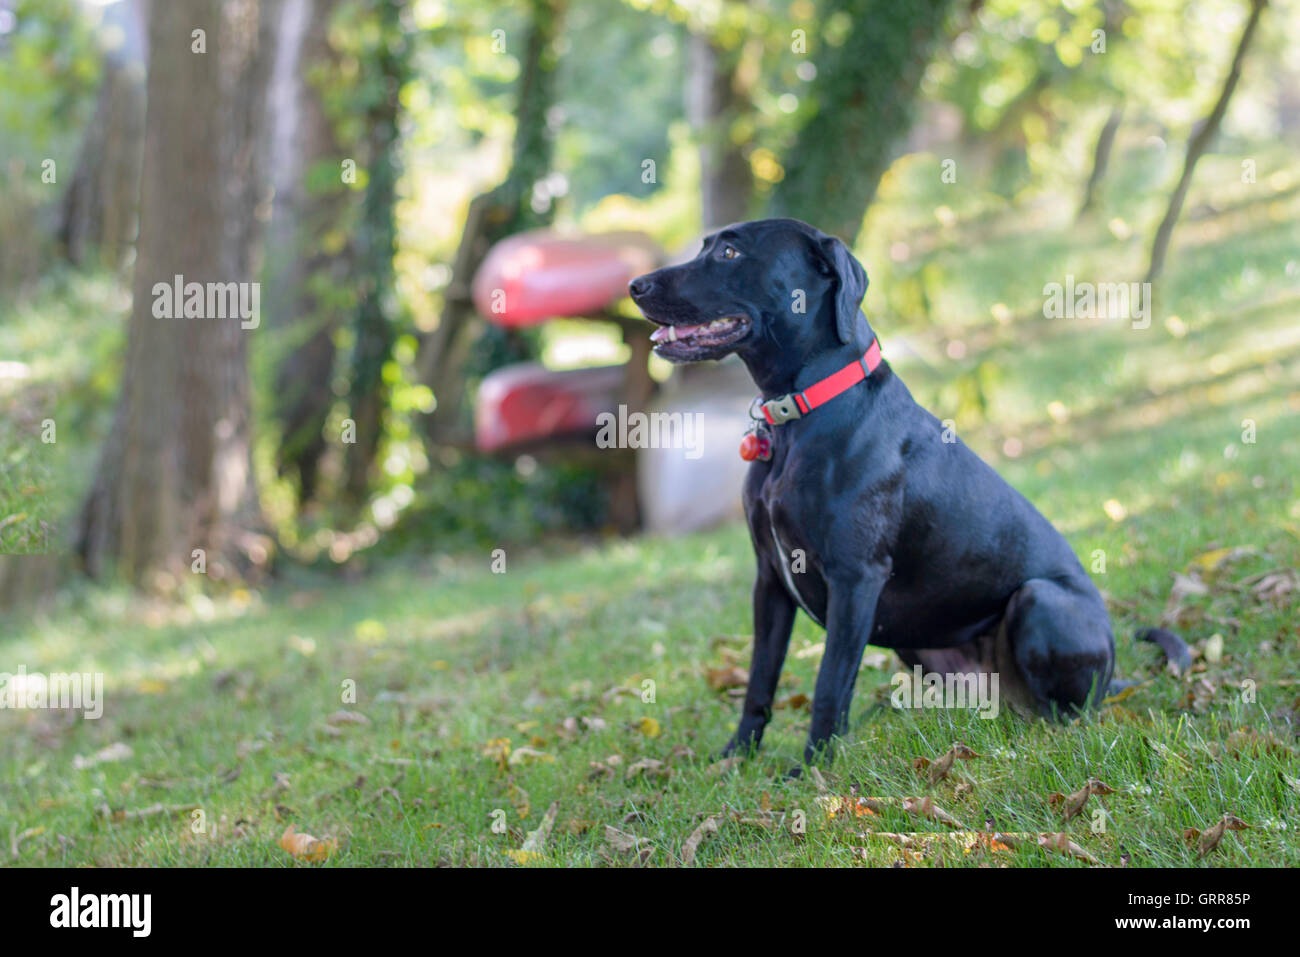 Lab mix dog in a rural setting with canoes in the background Stock Photo